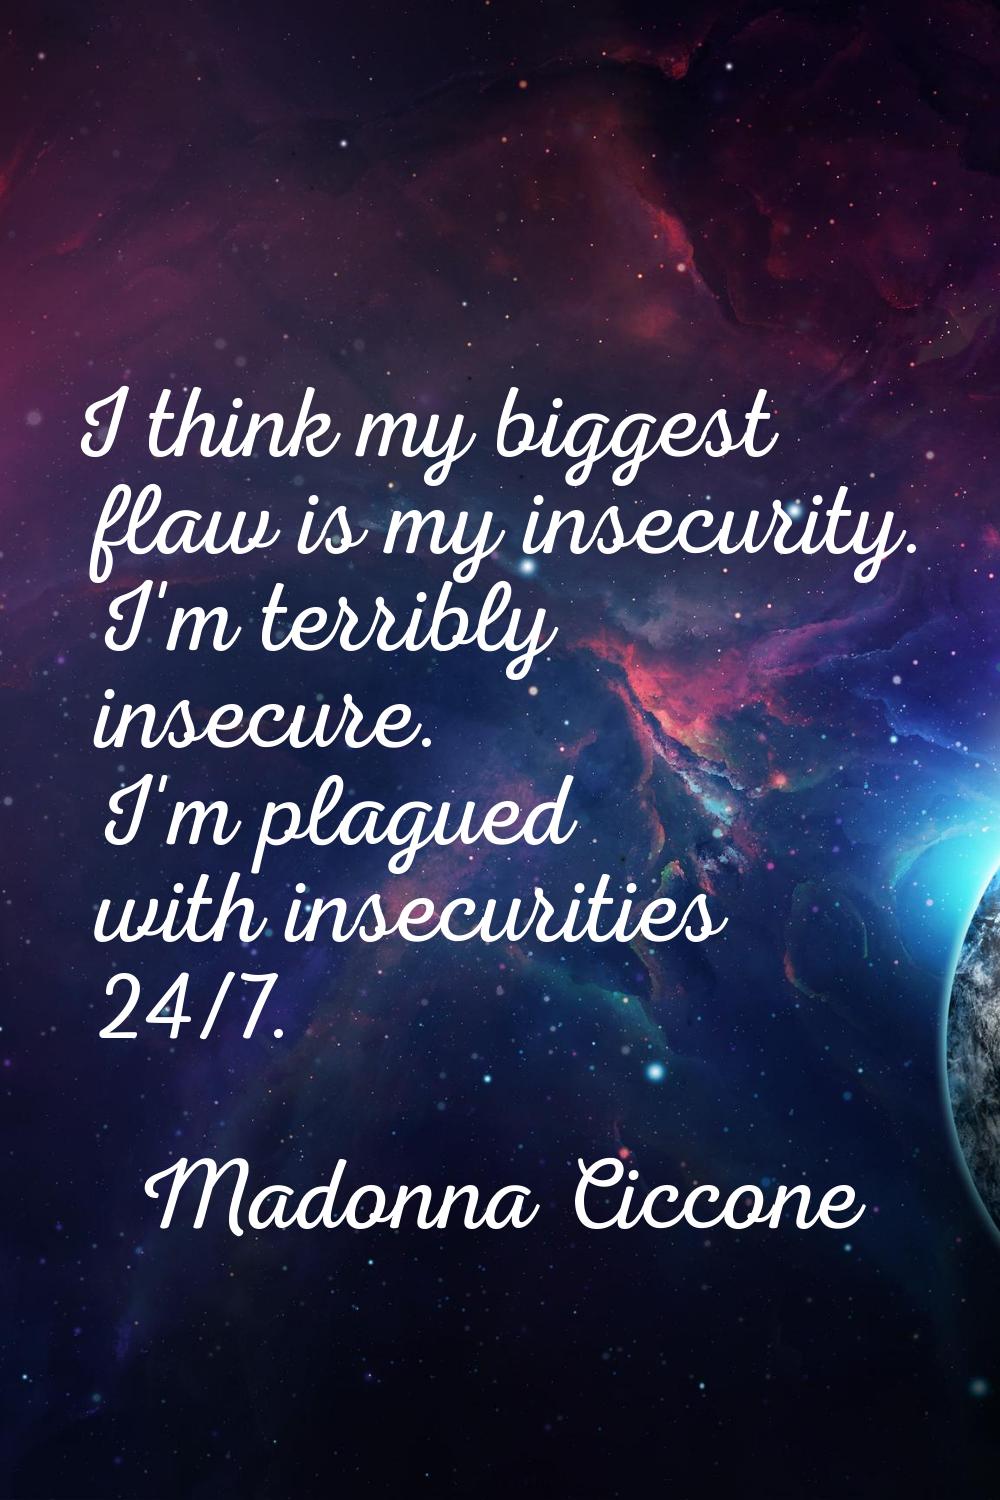 I think my biggest flaw is my insecurity. I'm terribly insecure. I'm plagued with insecurities 24/7